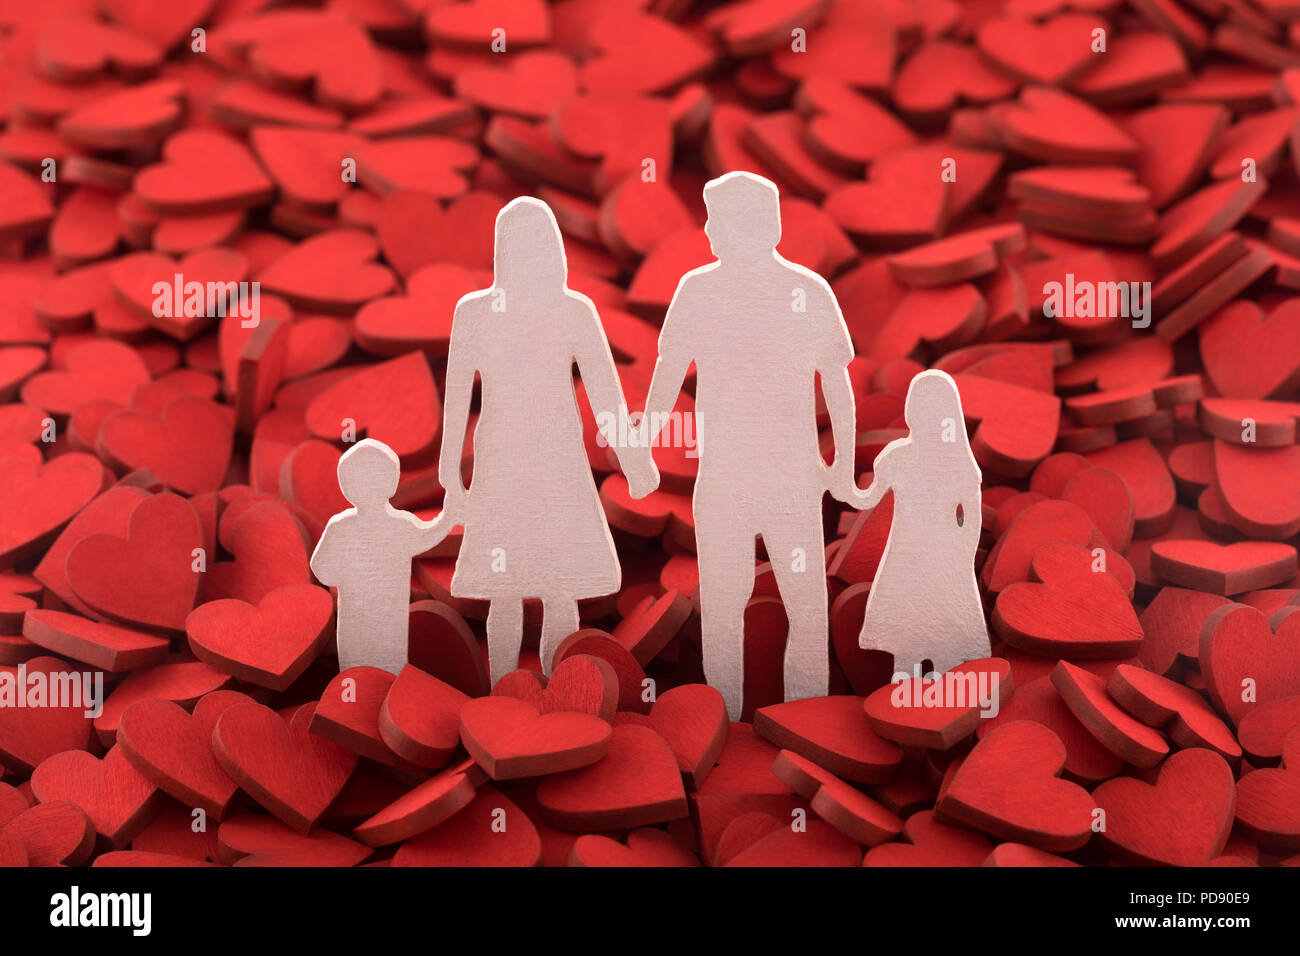 Love and happy family concept. Family figure over hundreds of red hearts. Stock Photo